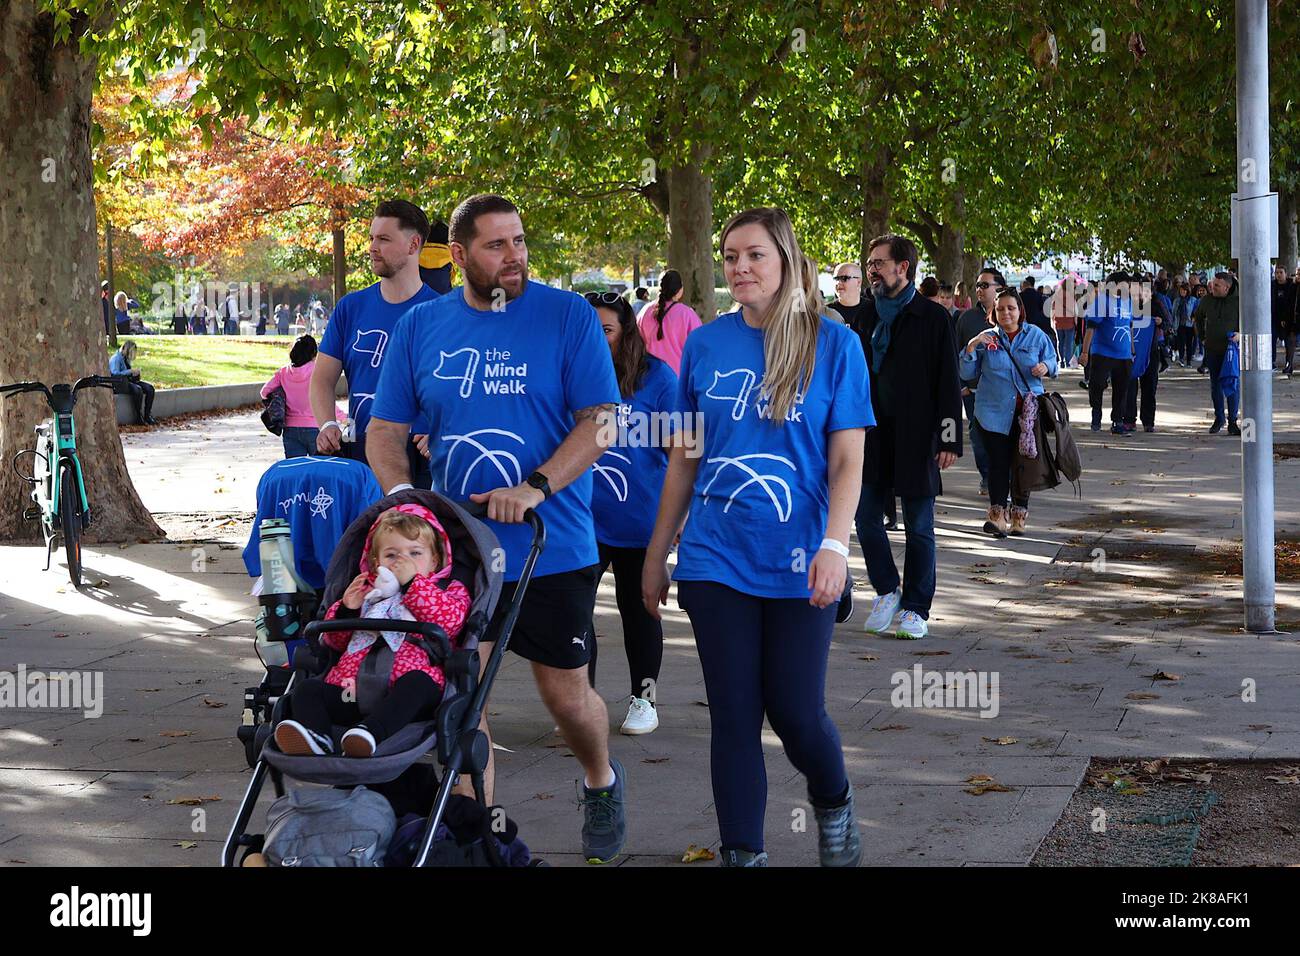 Southbank, London, UK. 22 October, 2022. The Mind Walk is a family friendly 10km walk. Bringing people together to raise money and awareness in the fight for mental health. We're asking each person taking part to try and raise £100 to support our services. Photo Credit: Paul Lawrenson/Alamy Live News Stock Photo